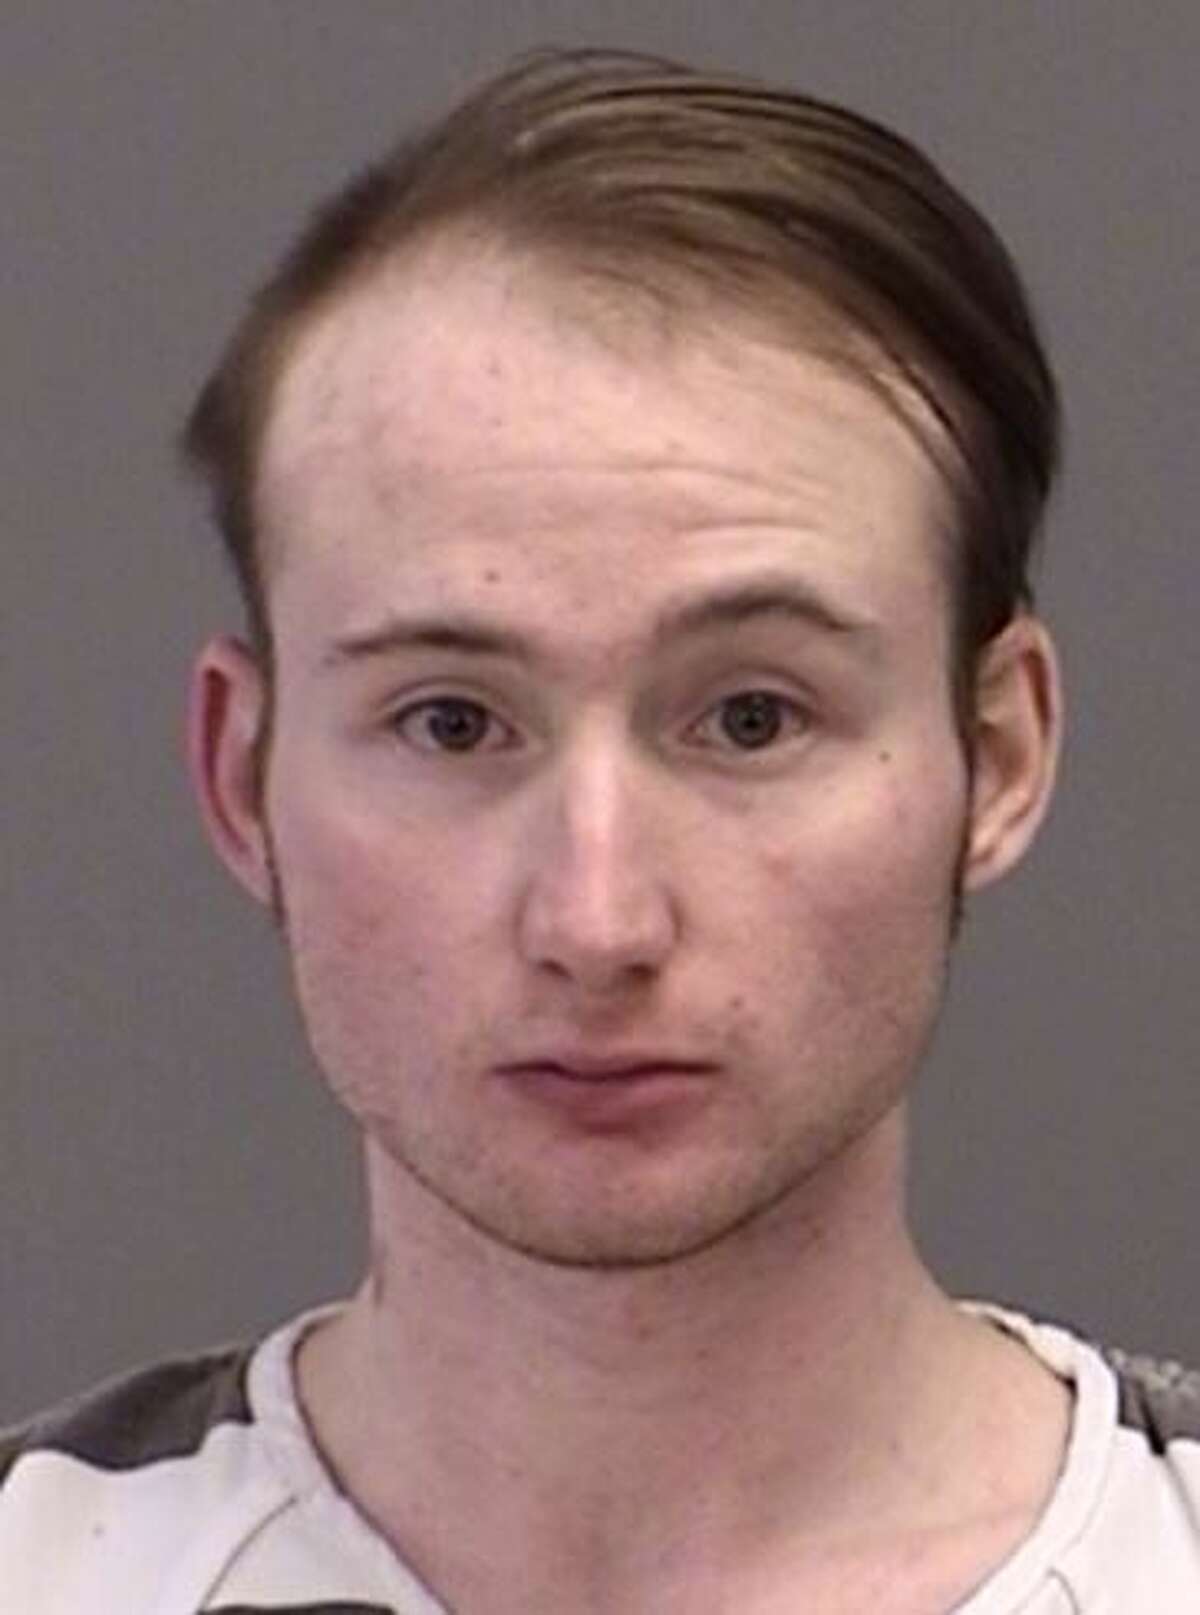 Christopher David Galliway, 23, of Fenton, Michigan, faces a second-degree felony charge of sexual assault of a child.